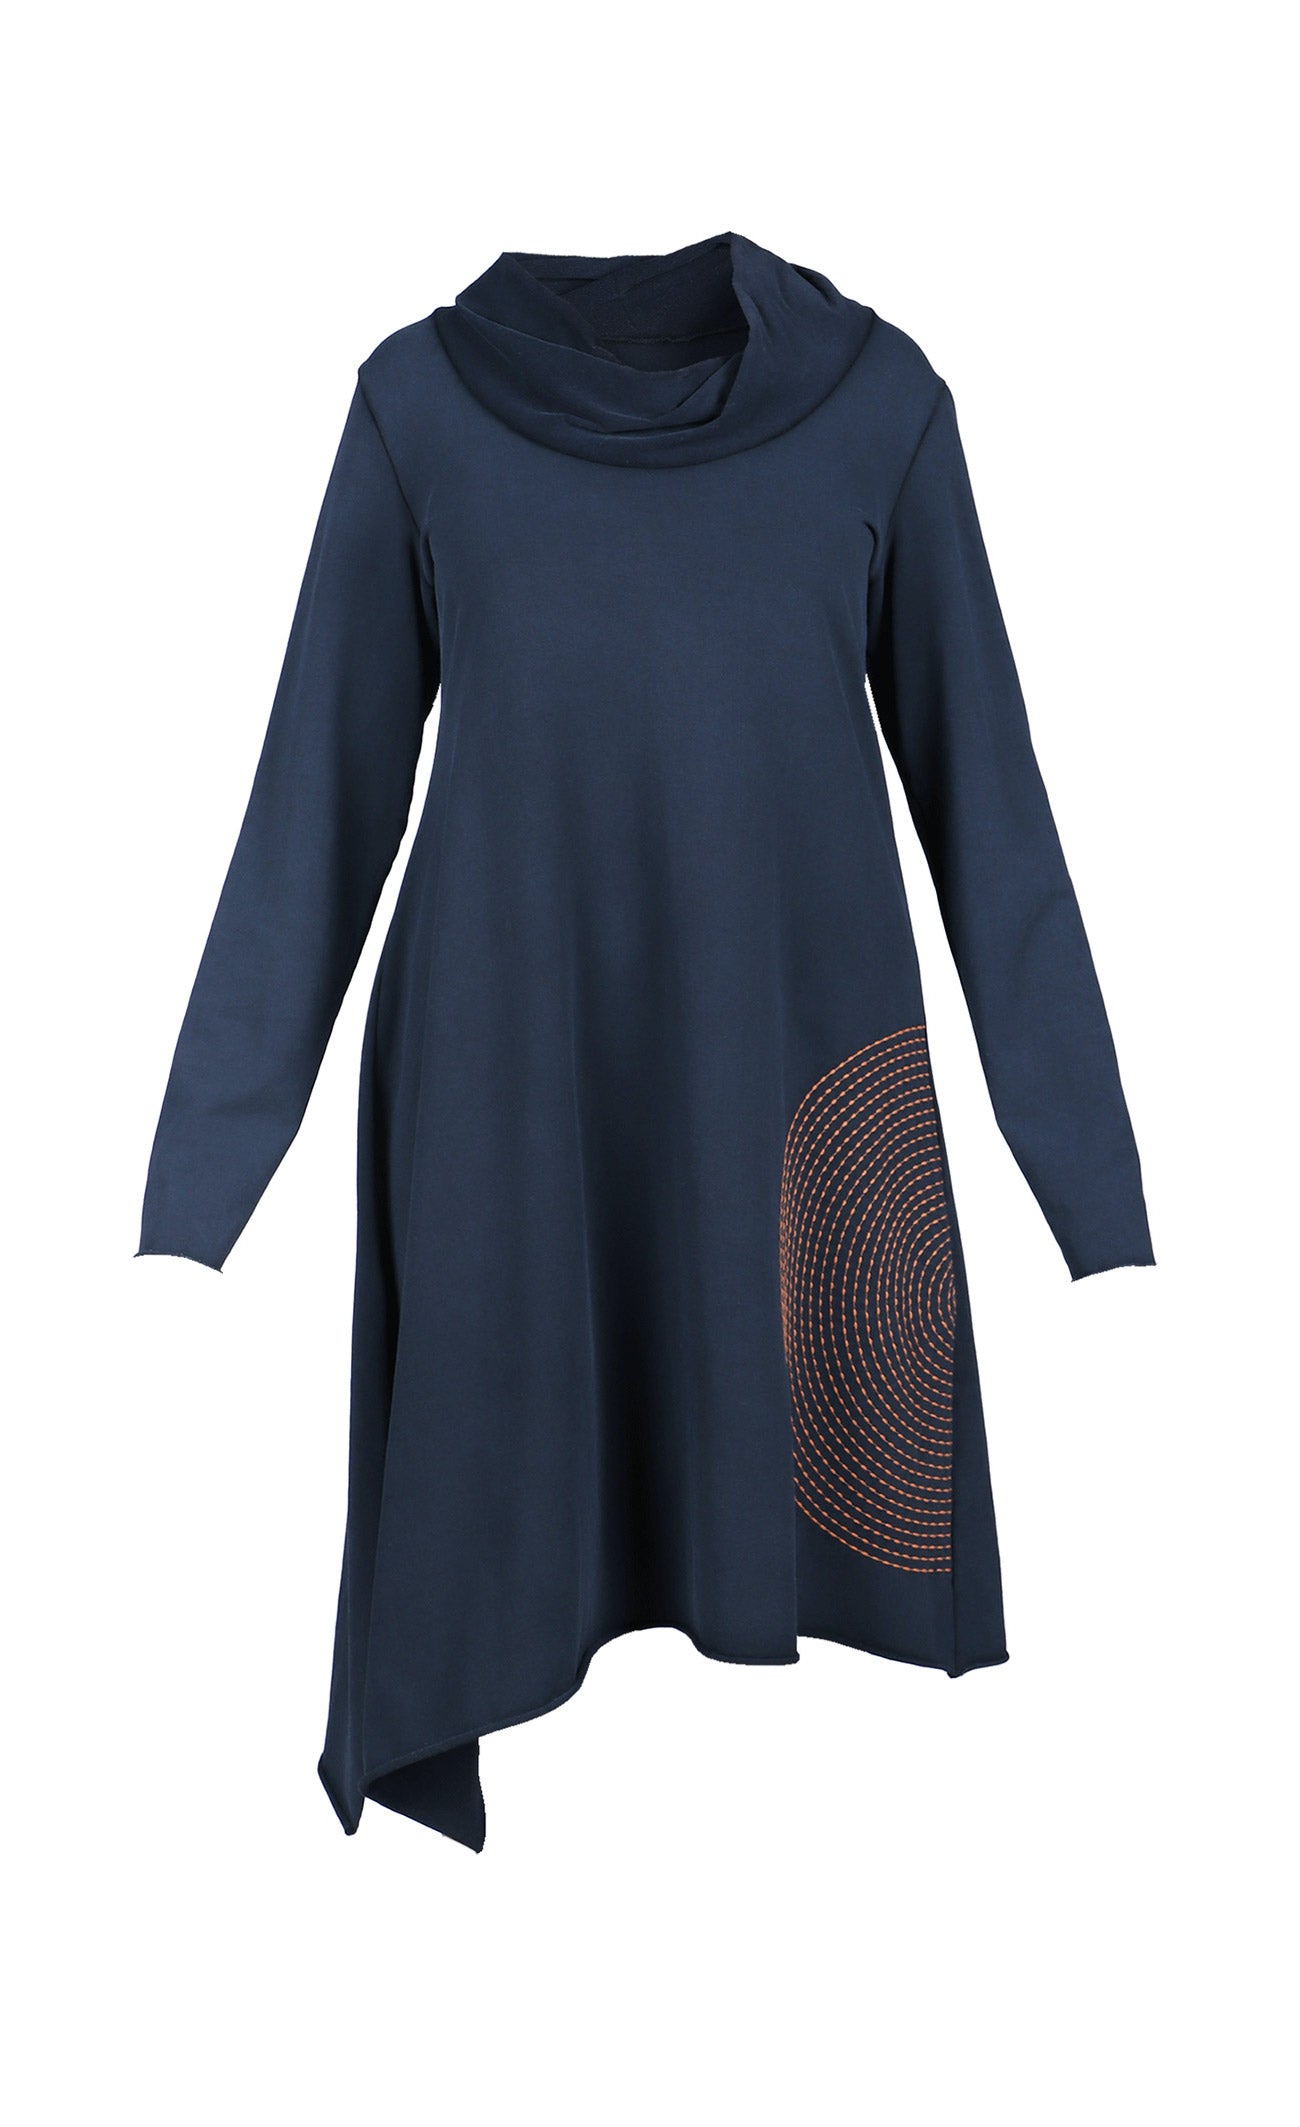 front view of the luukaa circles tunic/dress. This dress is black with an orange half-circle in the bottom left hand corner. The dress has long sleeves, a cowl neck, and sits at the knees.